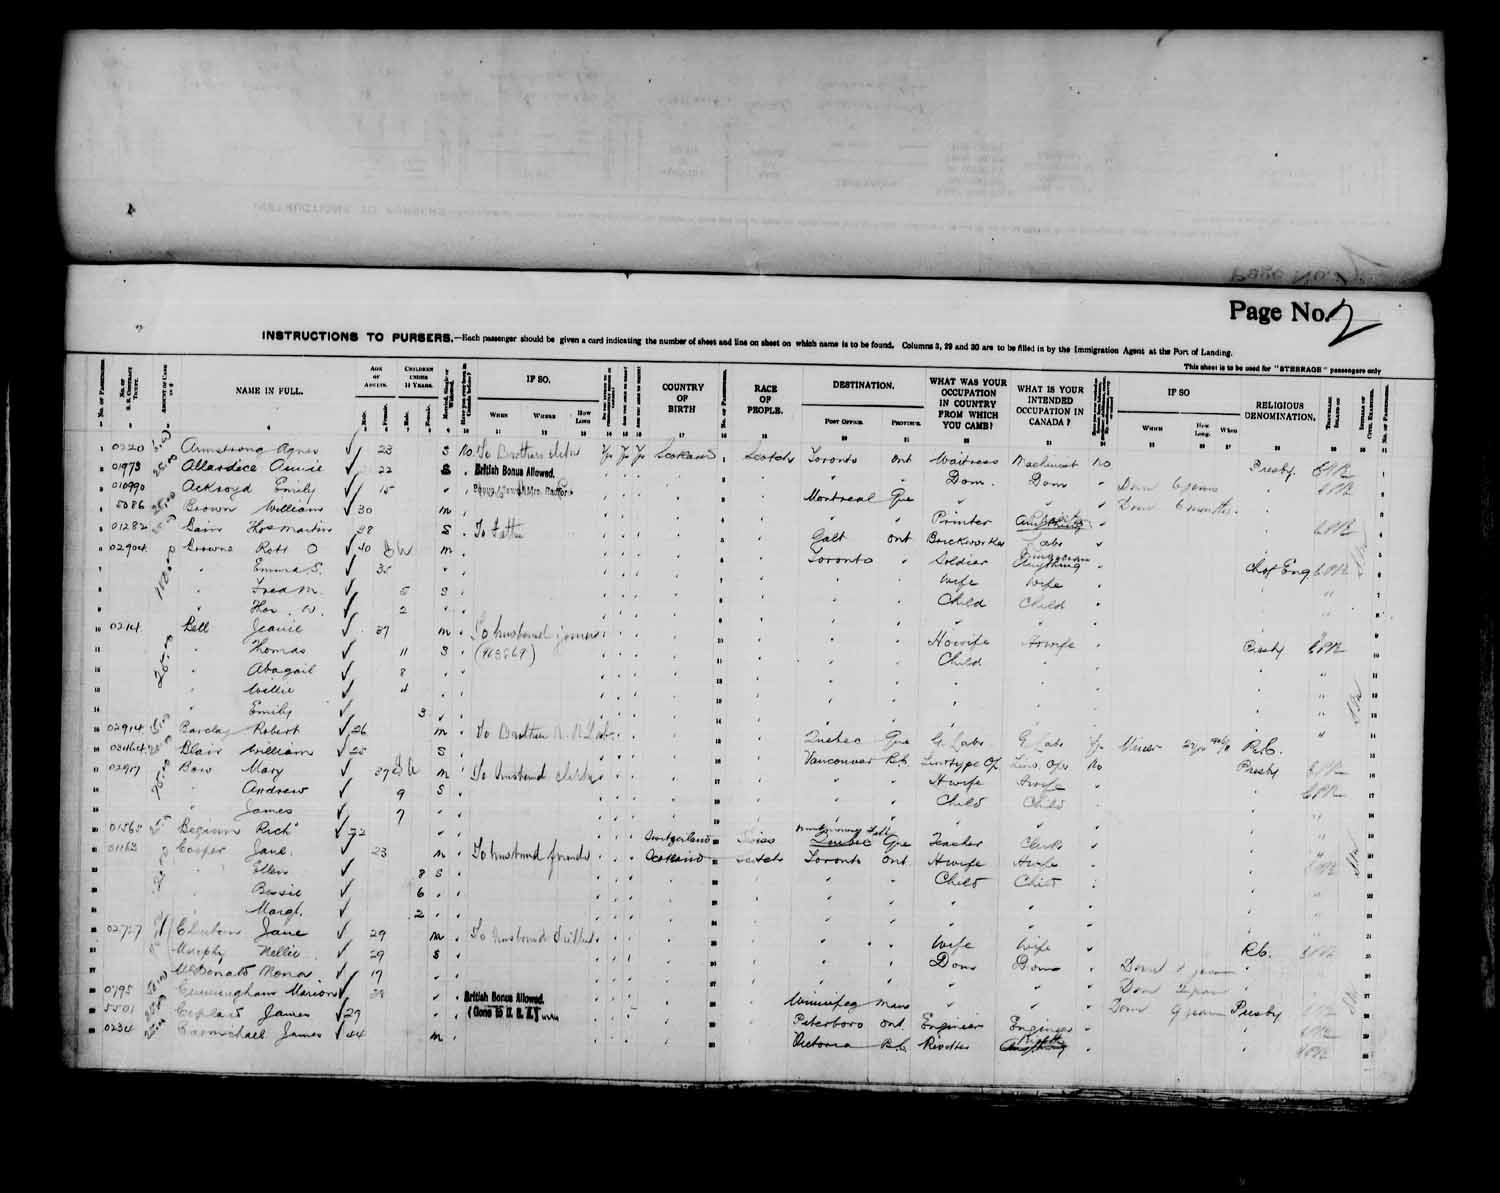 Digitized page of Passenger Lists for Image No.: e003566521